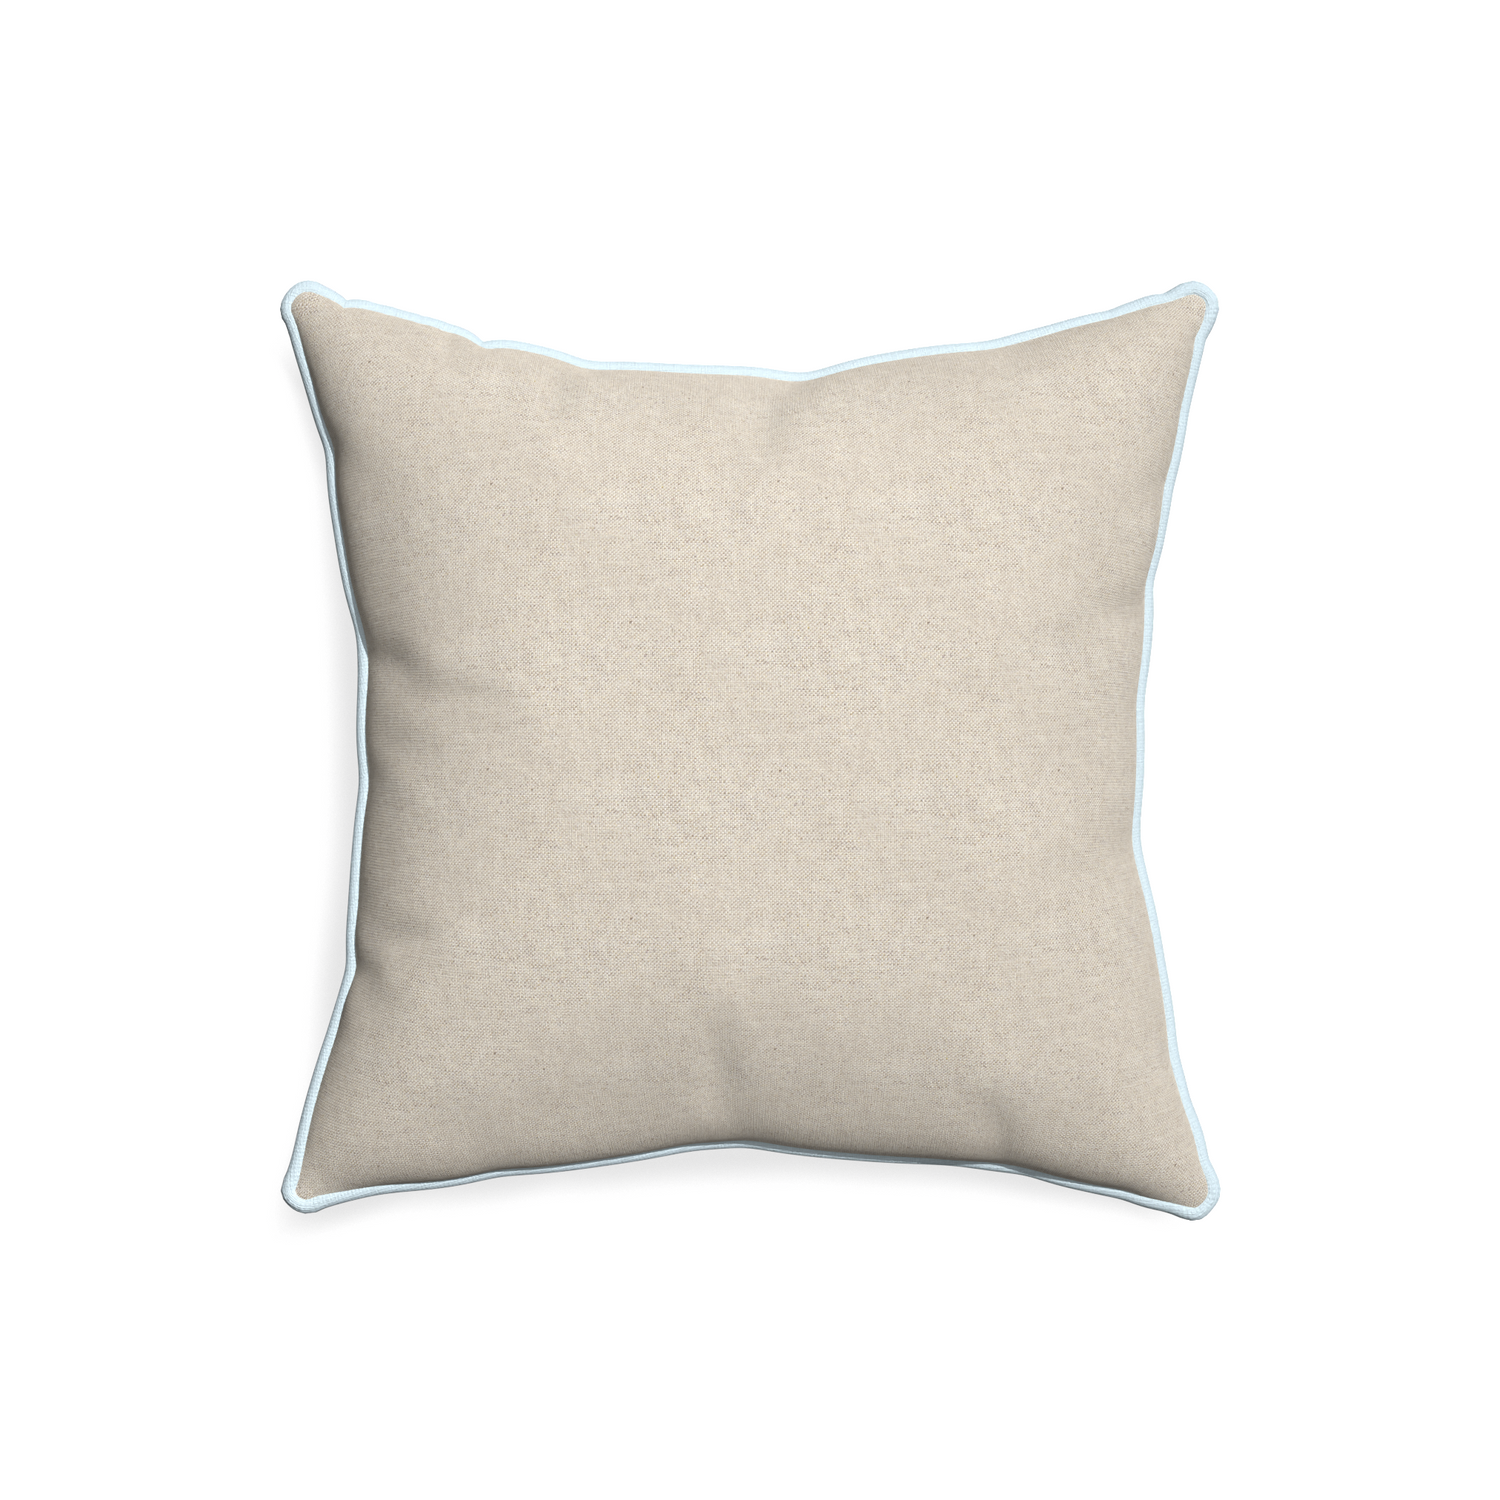 20-square oat custom pillow with powder piping on white background